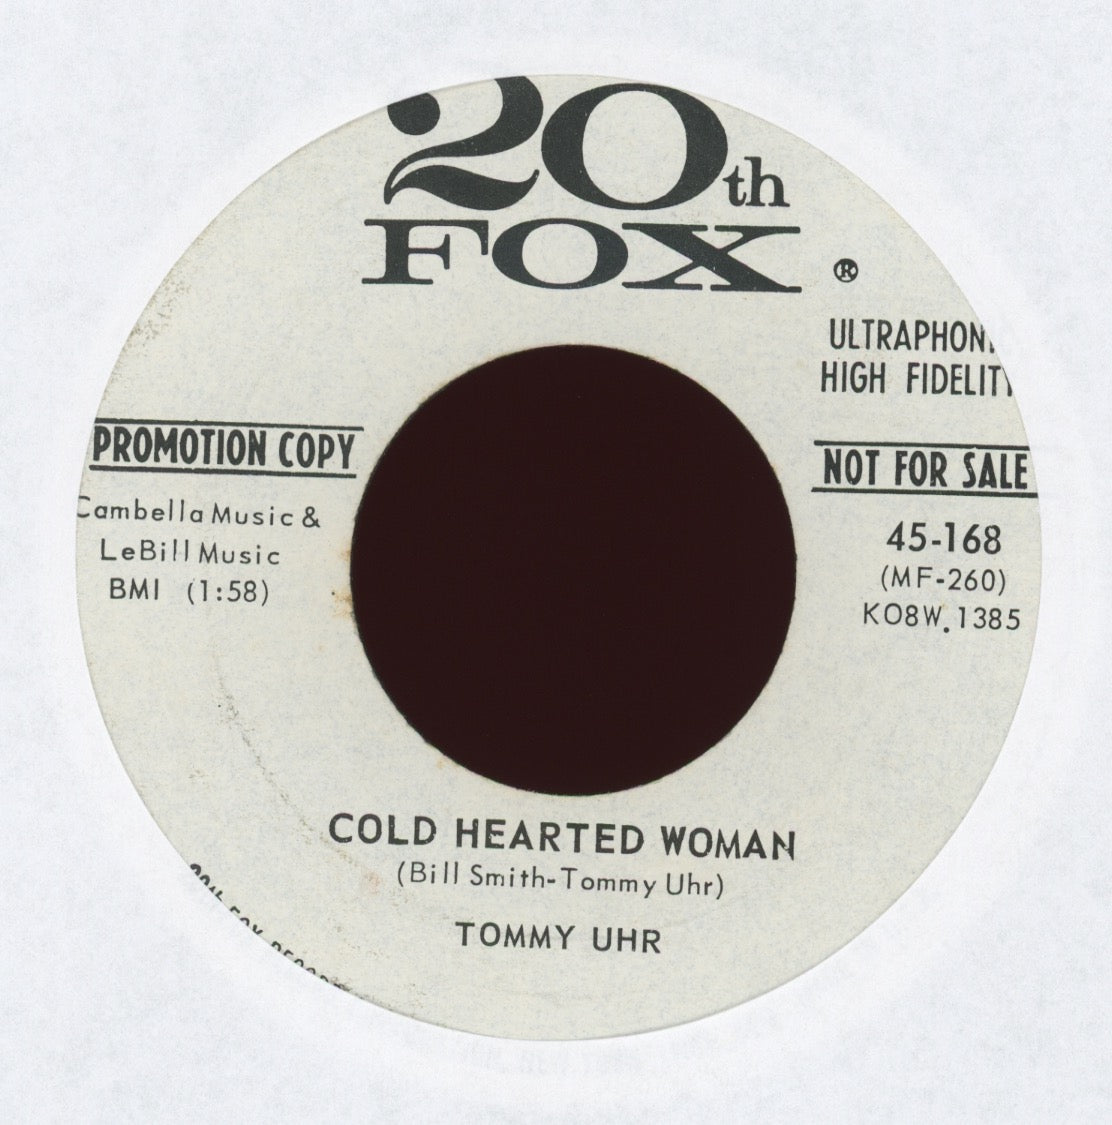 Tommy Uhr - Cold Hearted Woman on 20th Fox Promo